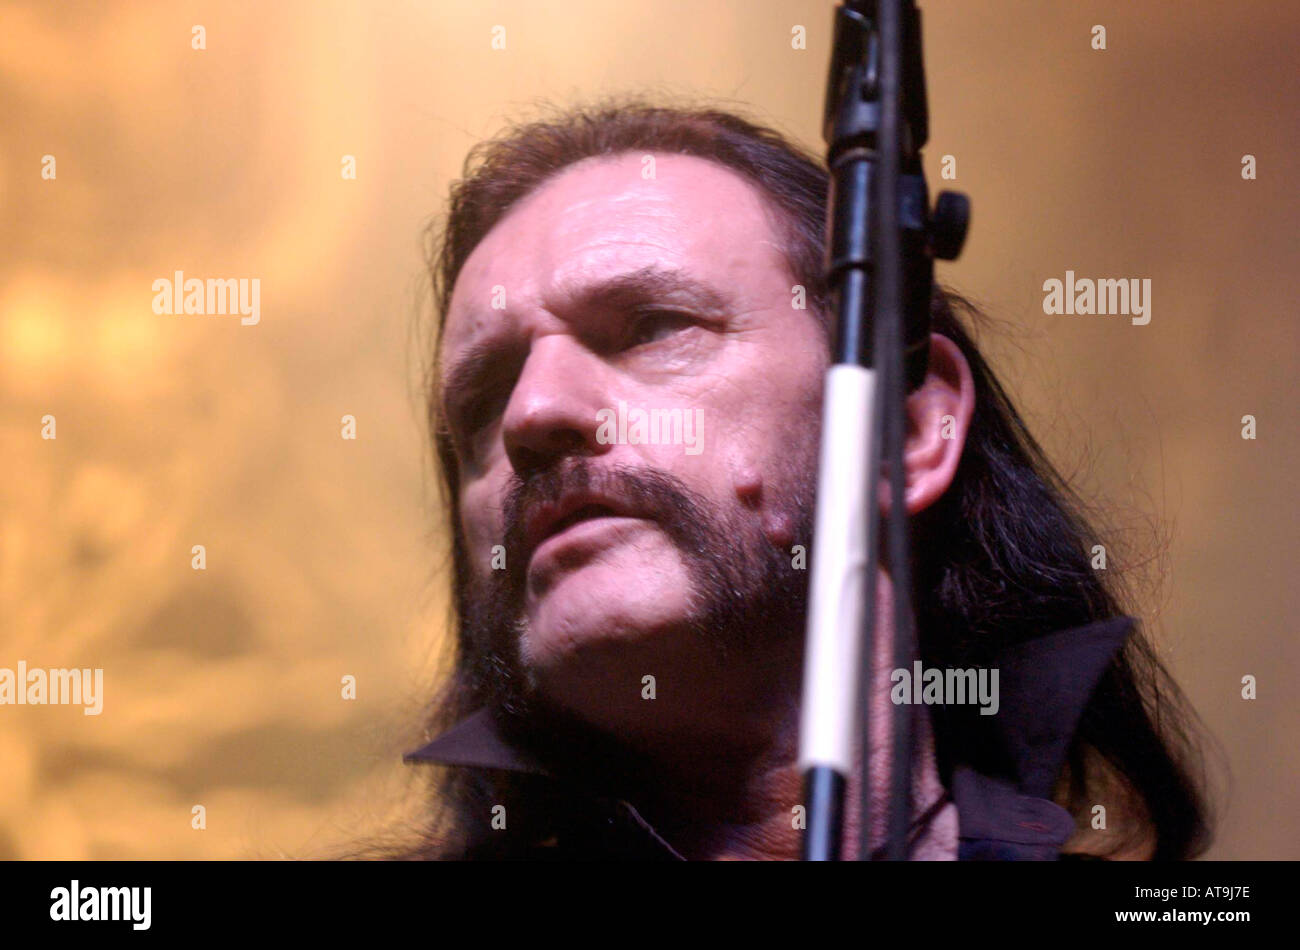 LEMMY FROM MOTORHEAD PLAYING ON THEIR 30TH ANNIVERSARY TOUR AT CARDIFF UNIVERSITY STUDENTS UNION Stock Photo